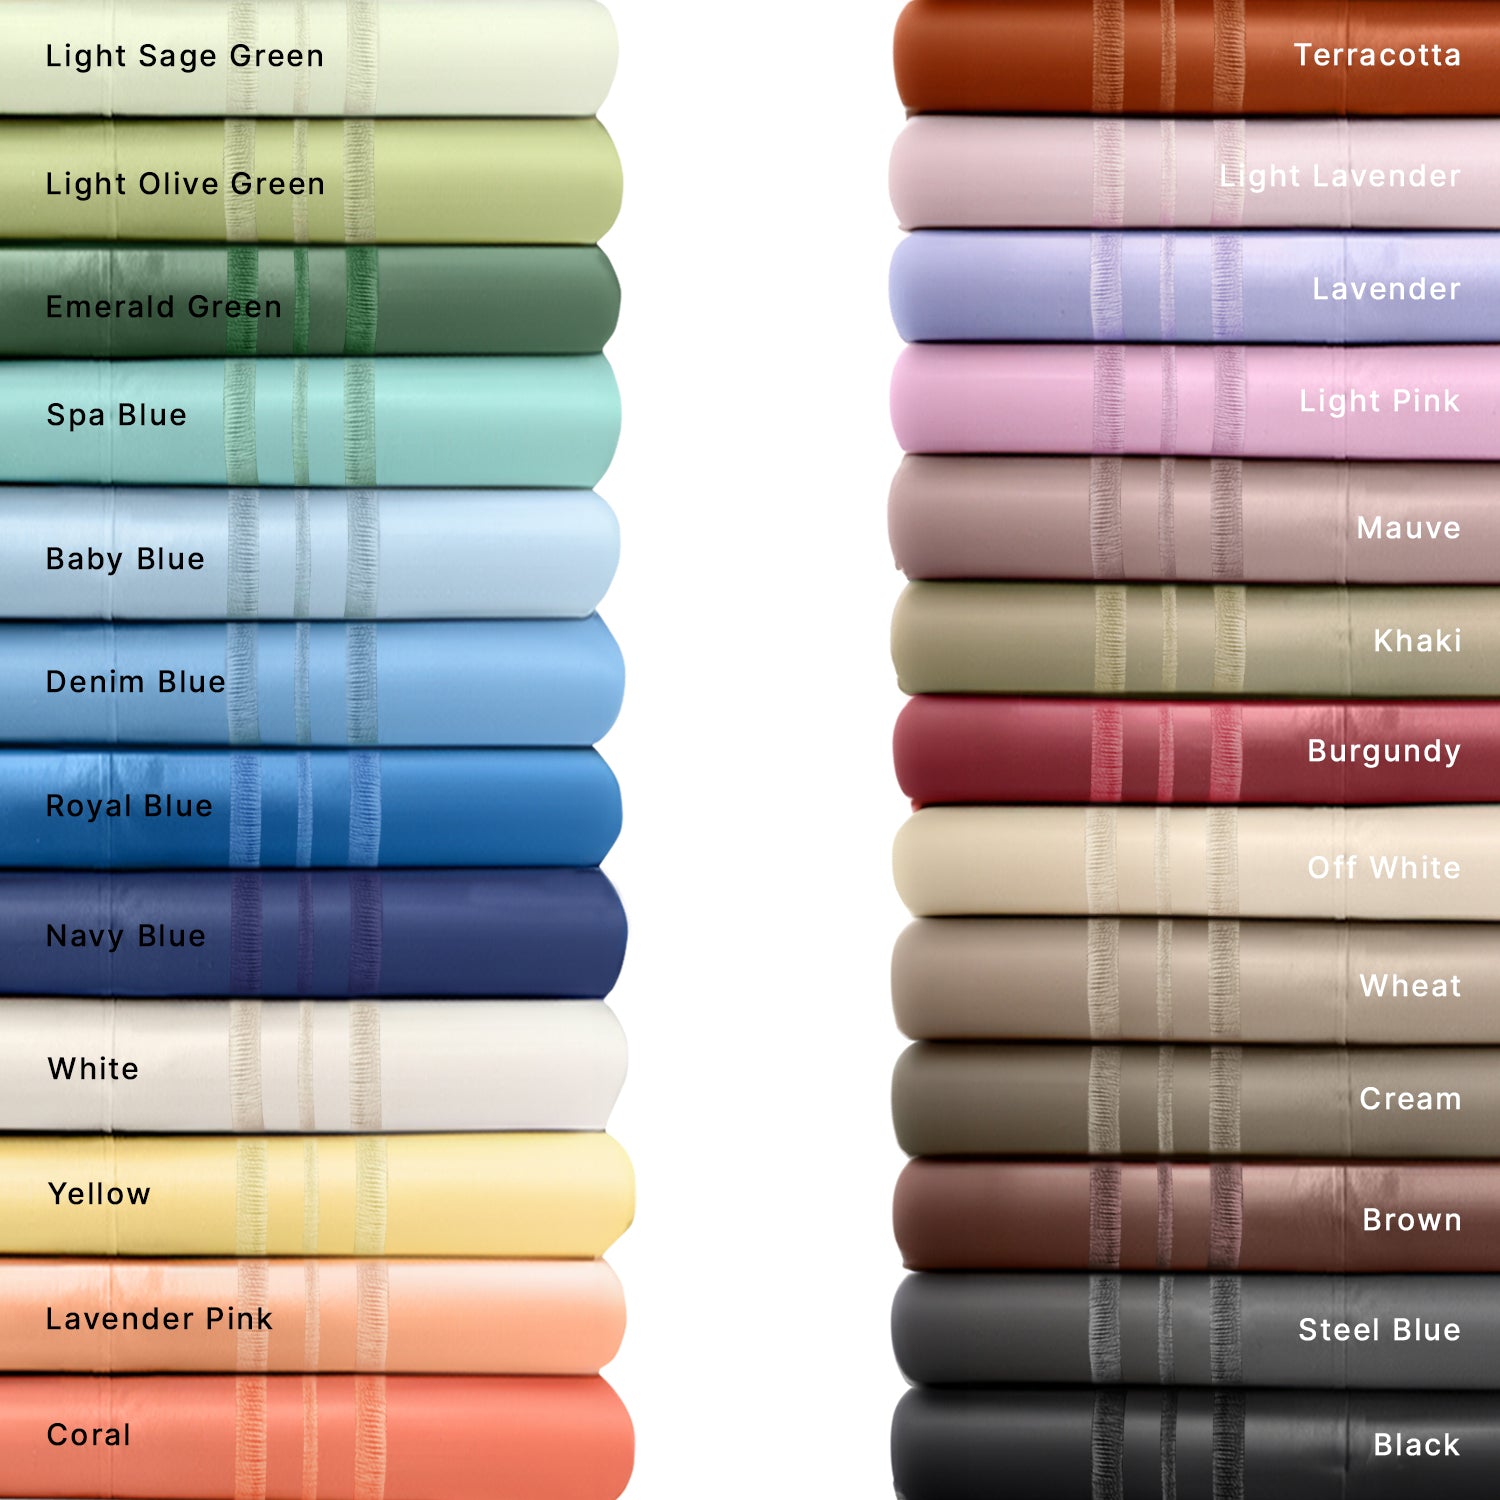 Stacks of sheets showing all color options